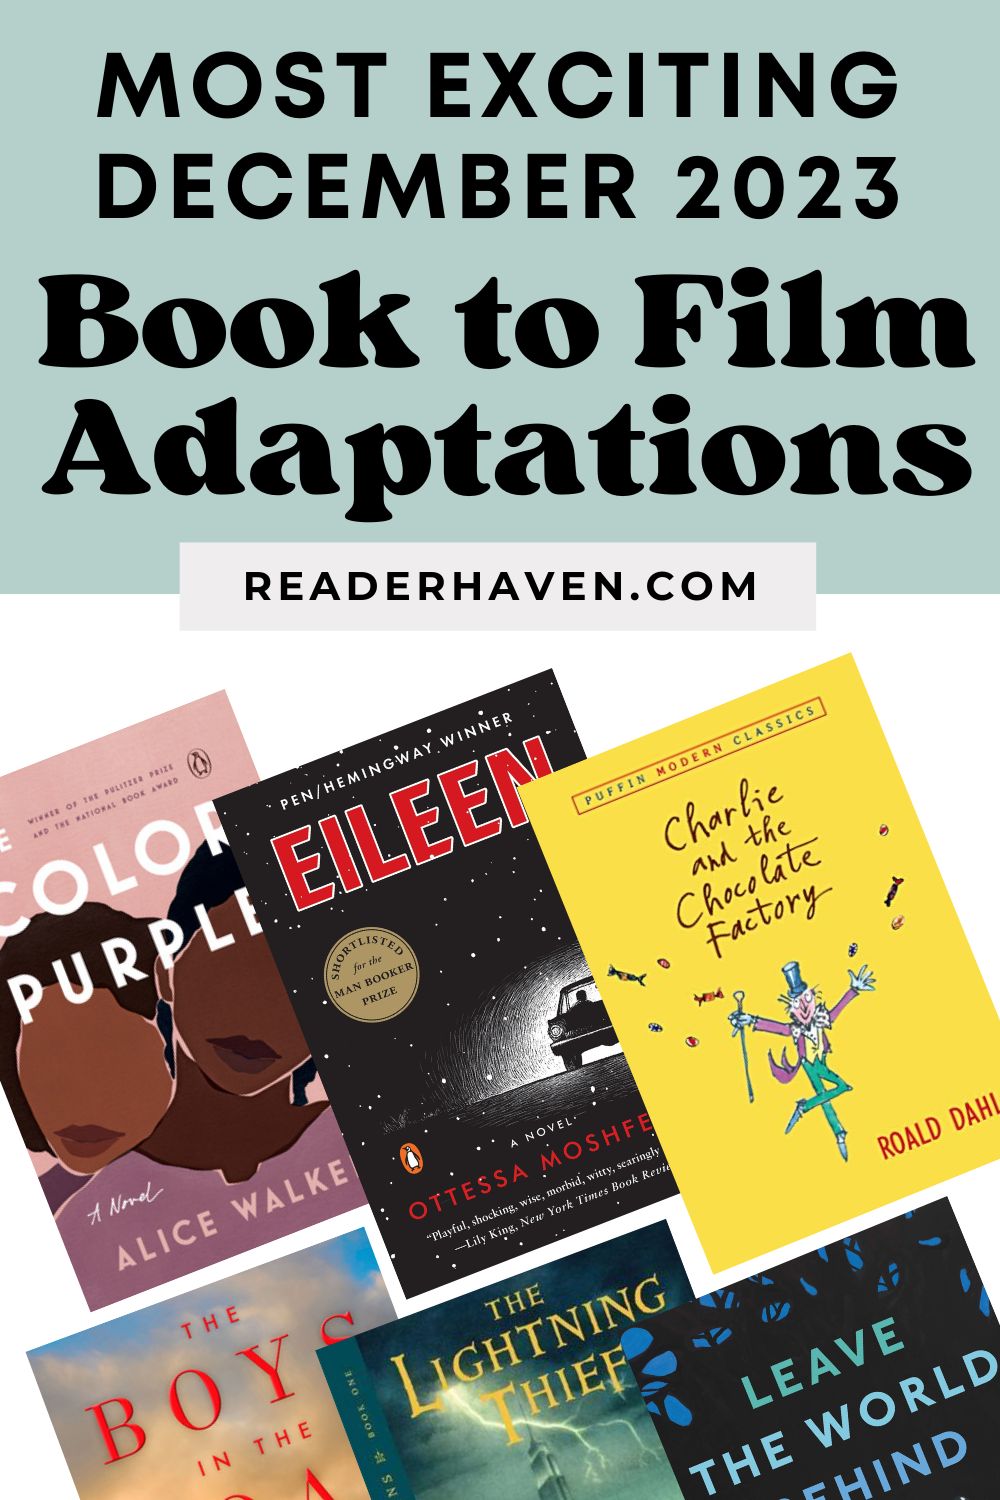 December 2023 book to film adaptations